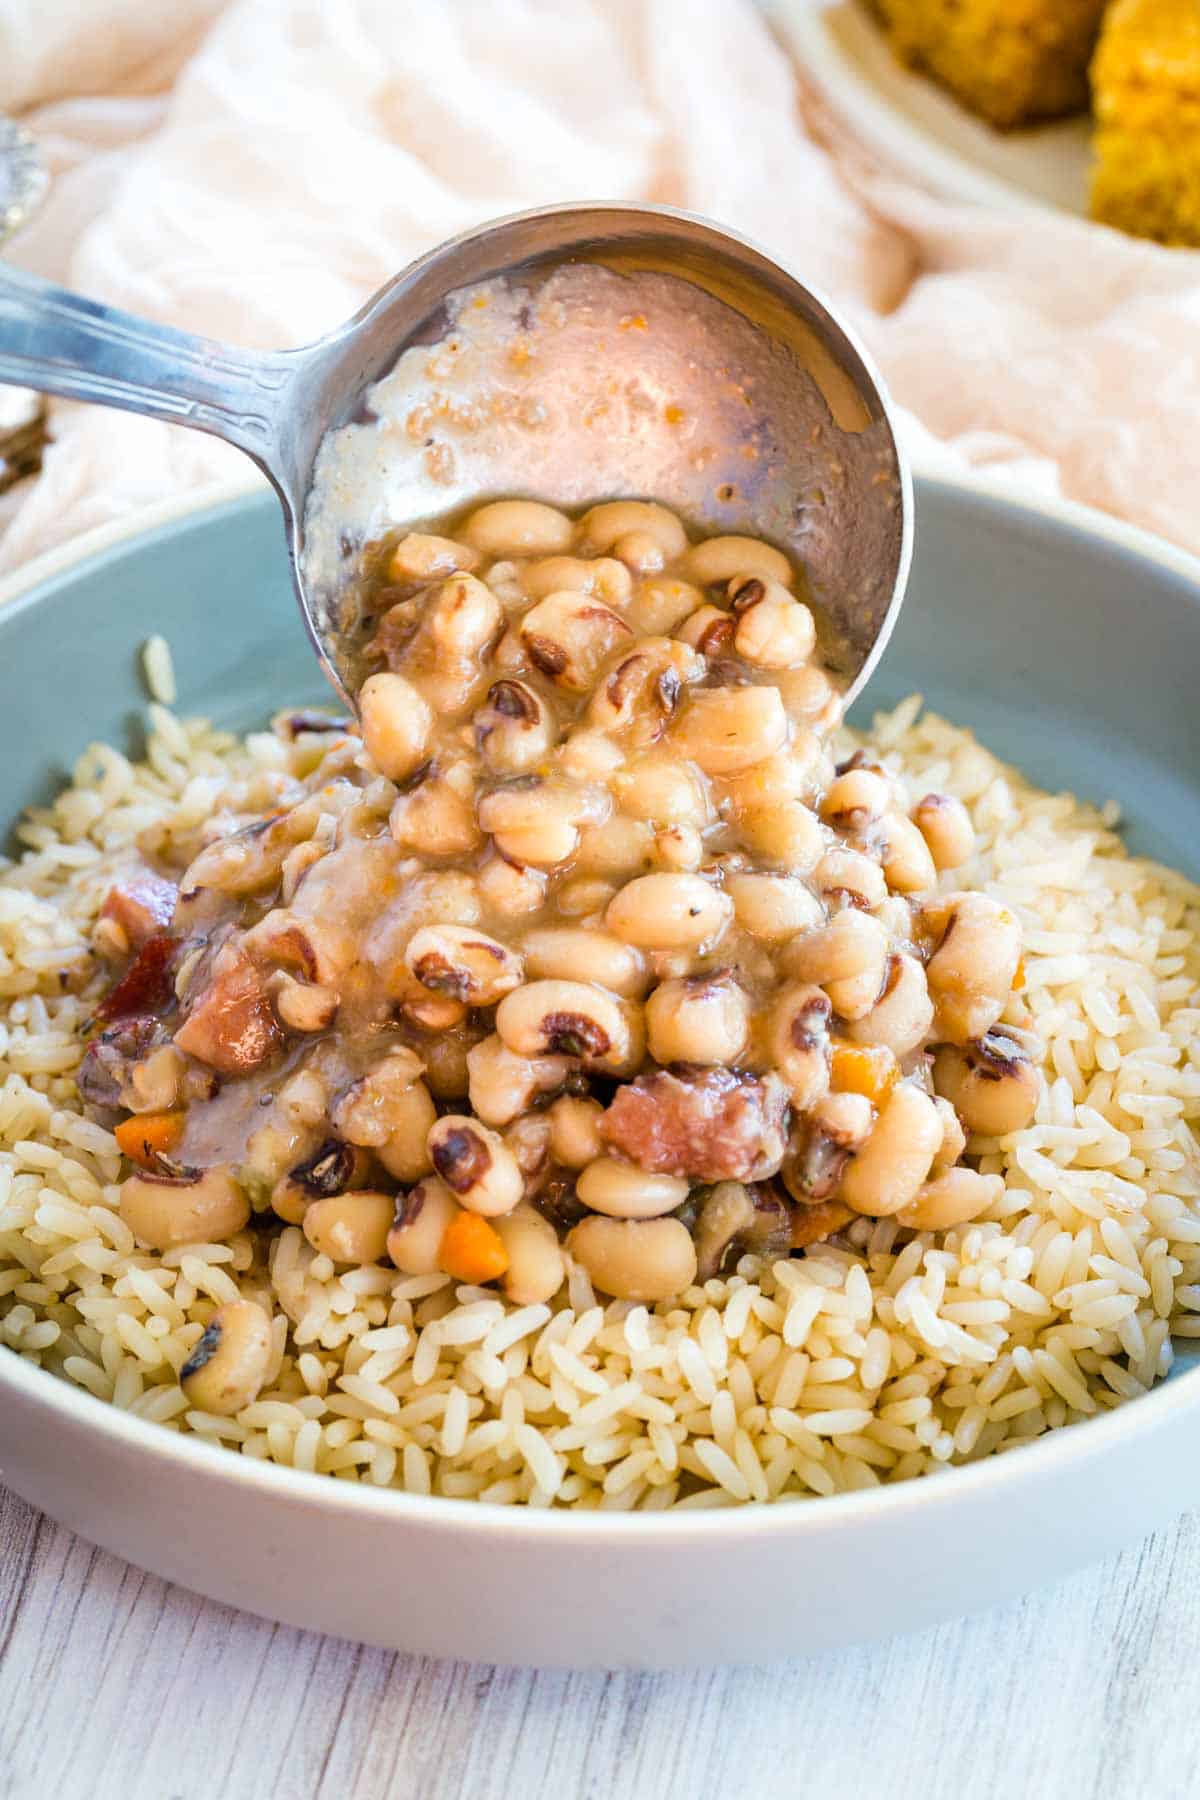 A ladle is used to serve black eyed peas over rice.